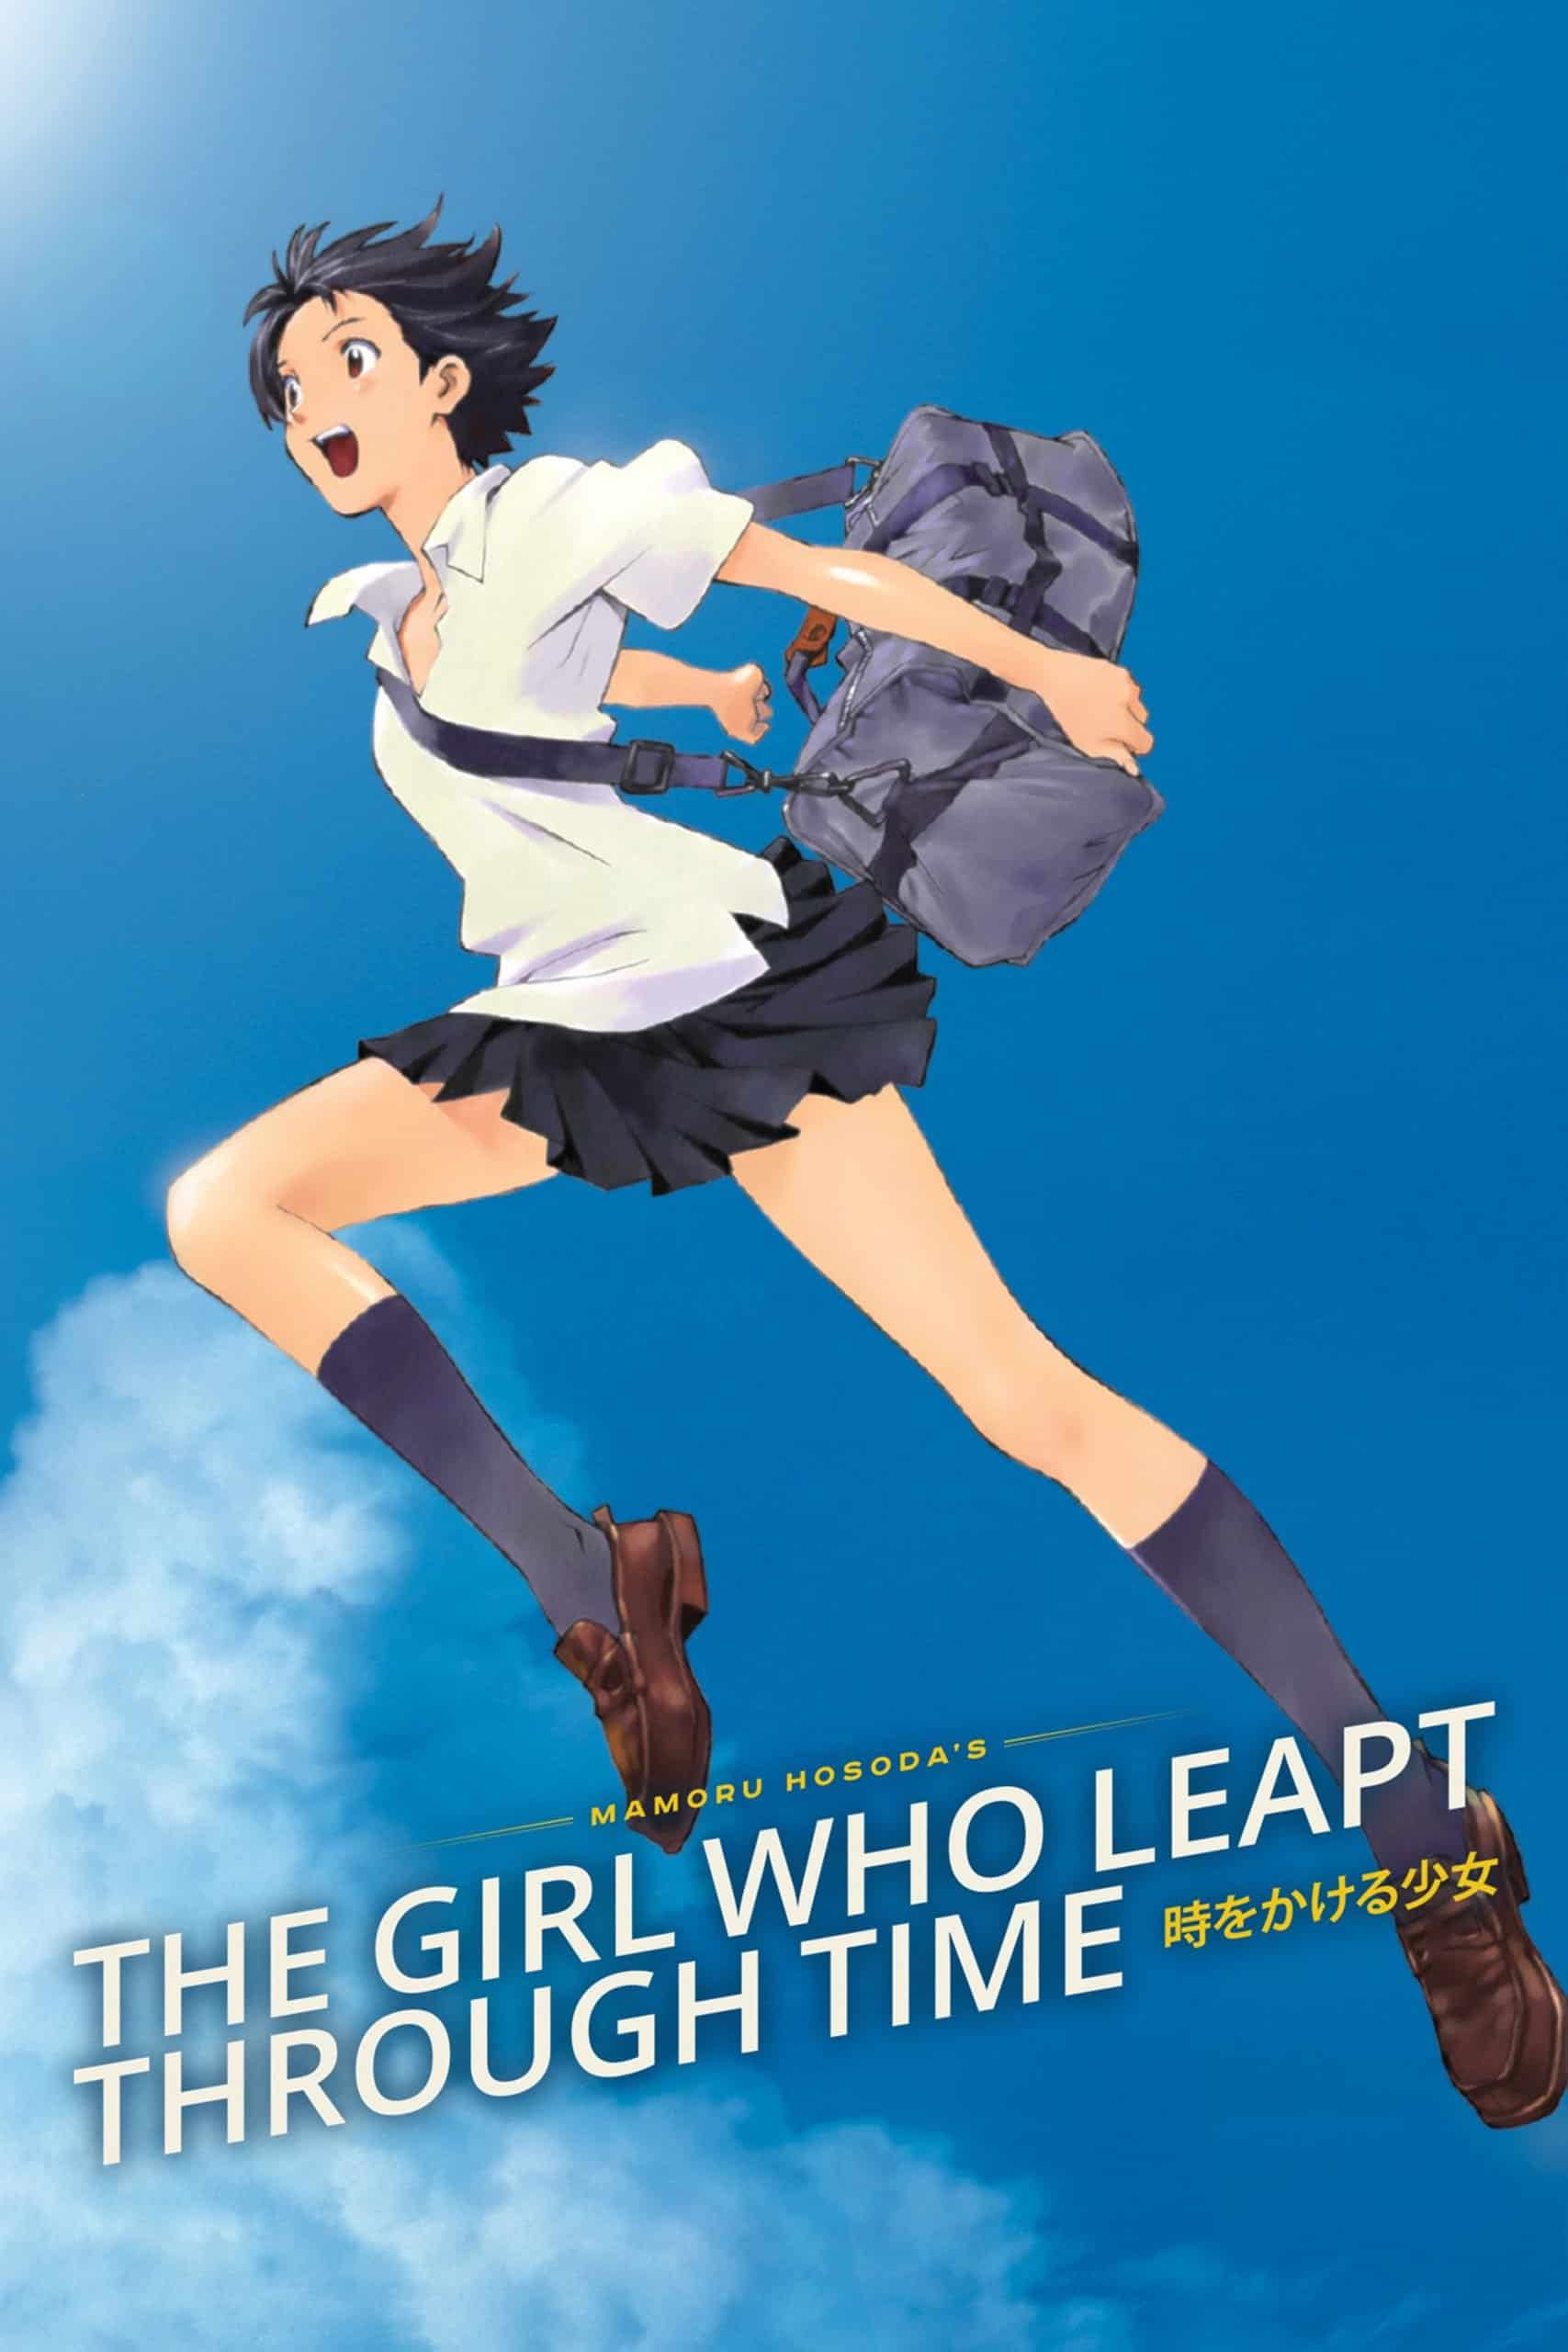 The Girl Who Leapt Through Time official cover art, 2006